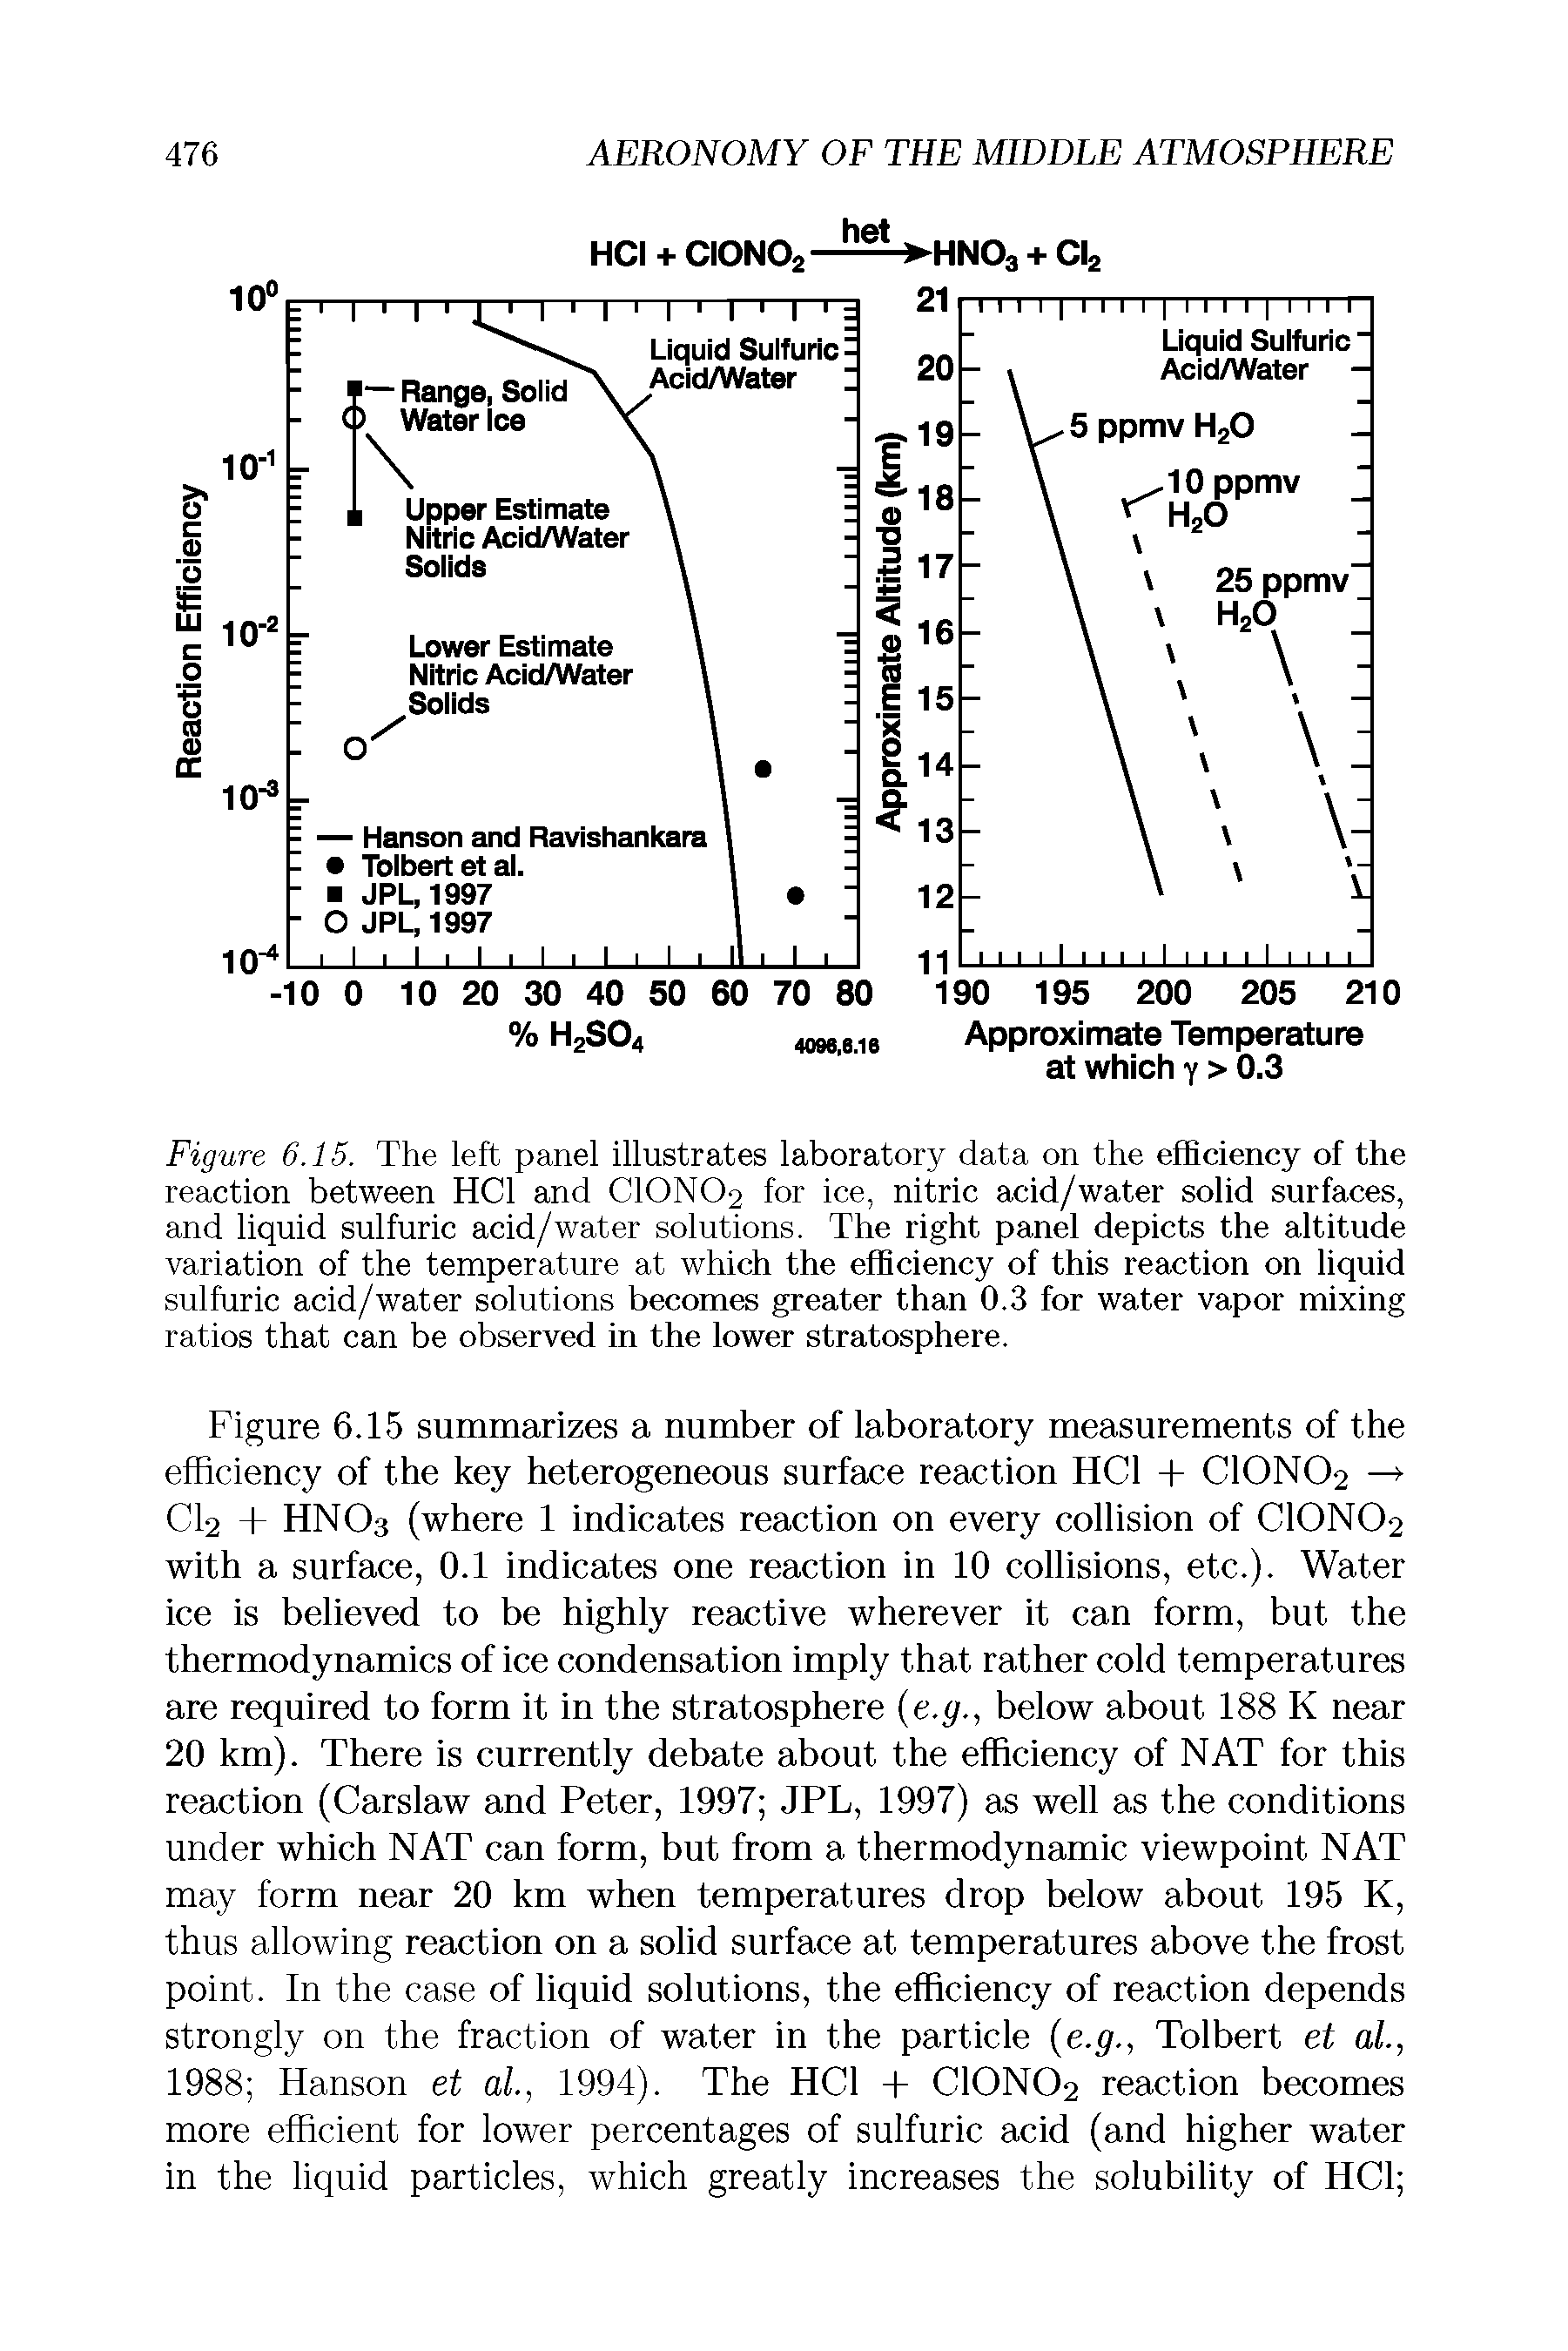 Figure 6.15. The left panel illustrates laboratory data on the efficiency of the reaction between HC1 and CIONO2 for ice, nitric acid/water solid surfaces, and liquid sulfuric acid/water solutions. The right panel depicts the altitude variation of the temperature at which the efficiency of this reaction on liquid sulfuric acid/water solutions becomes greater than 0.3 for water vapor mixing ratios that can be observed in the lower stratosphere.